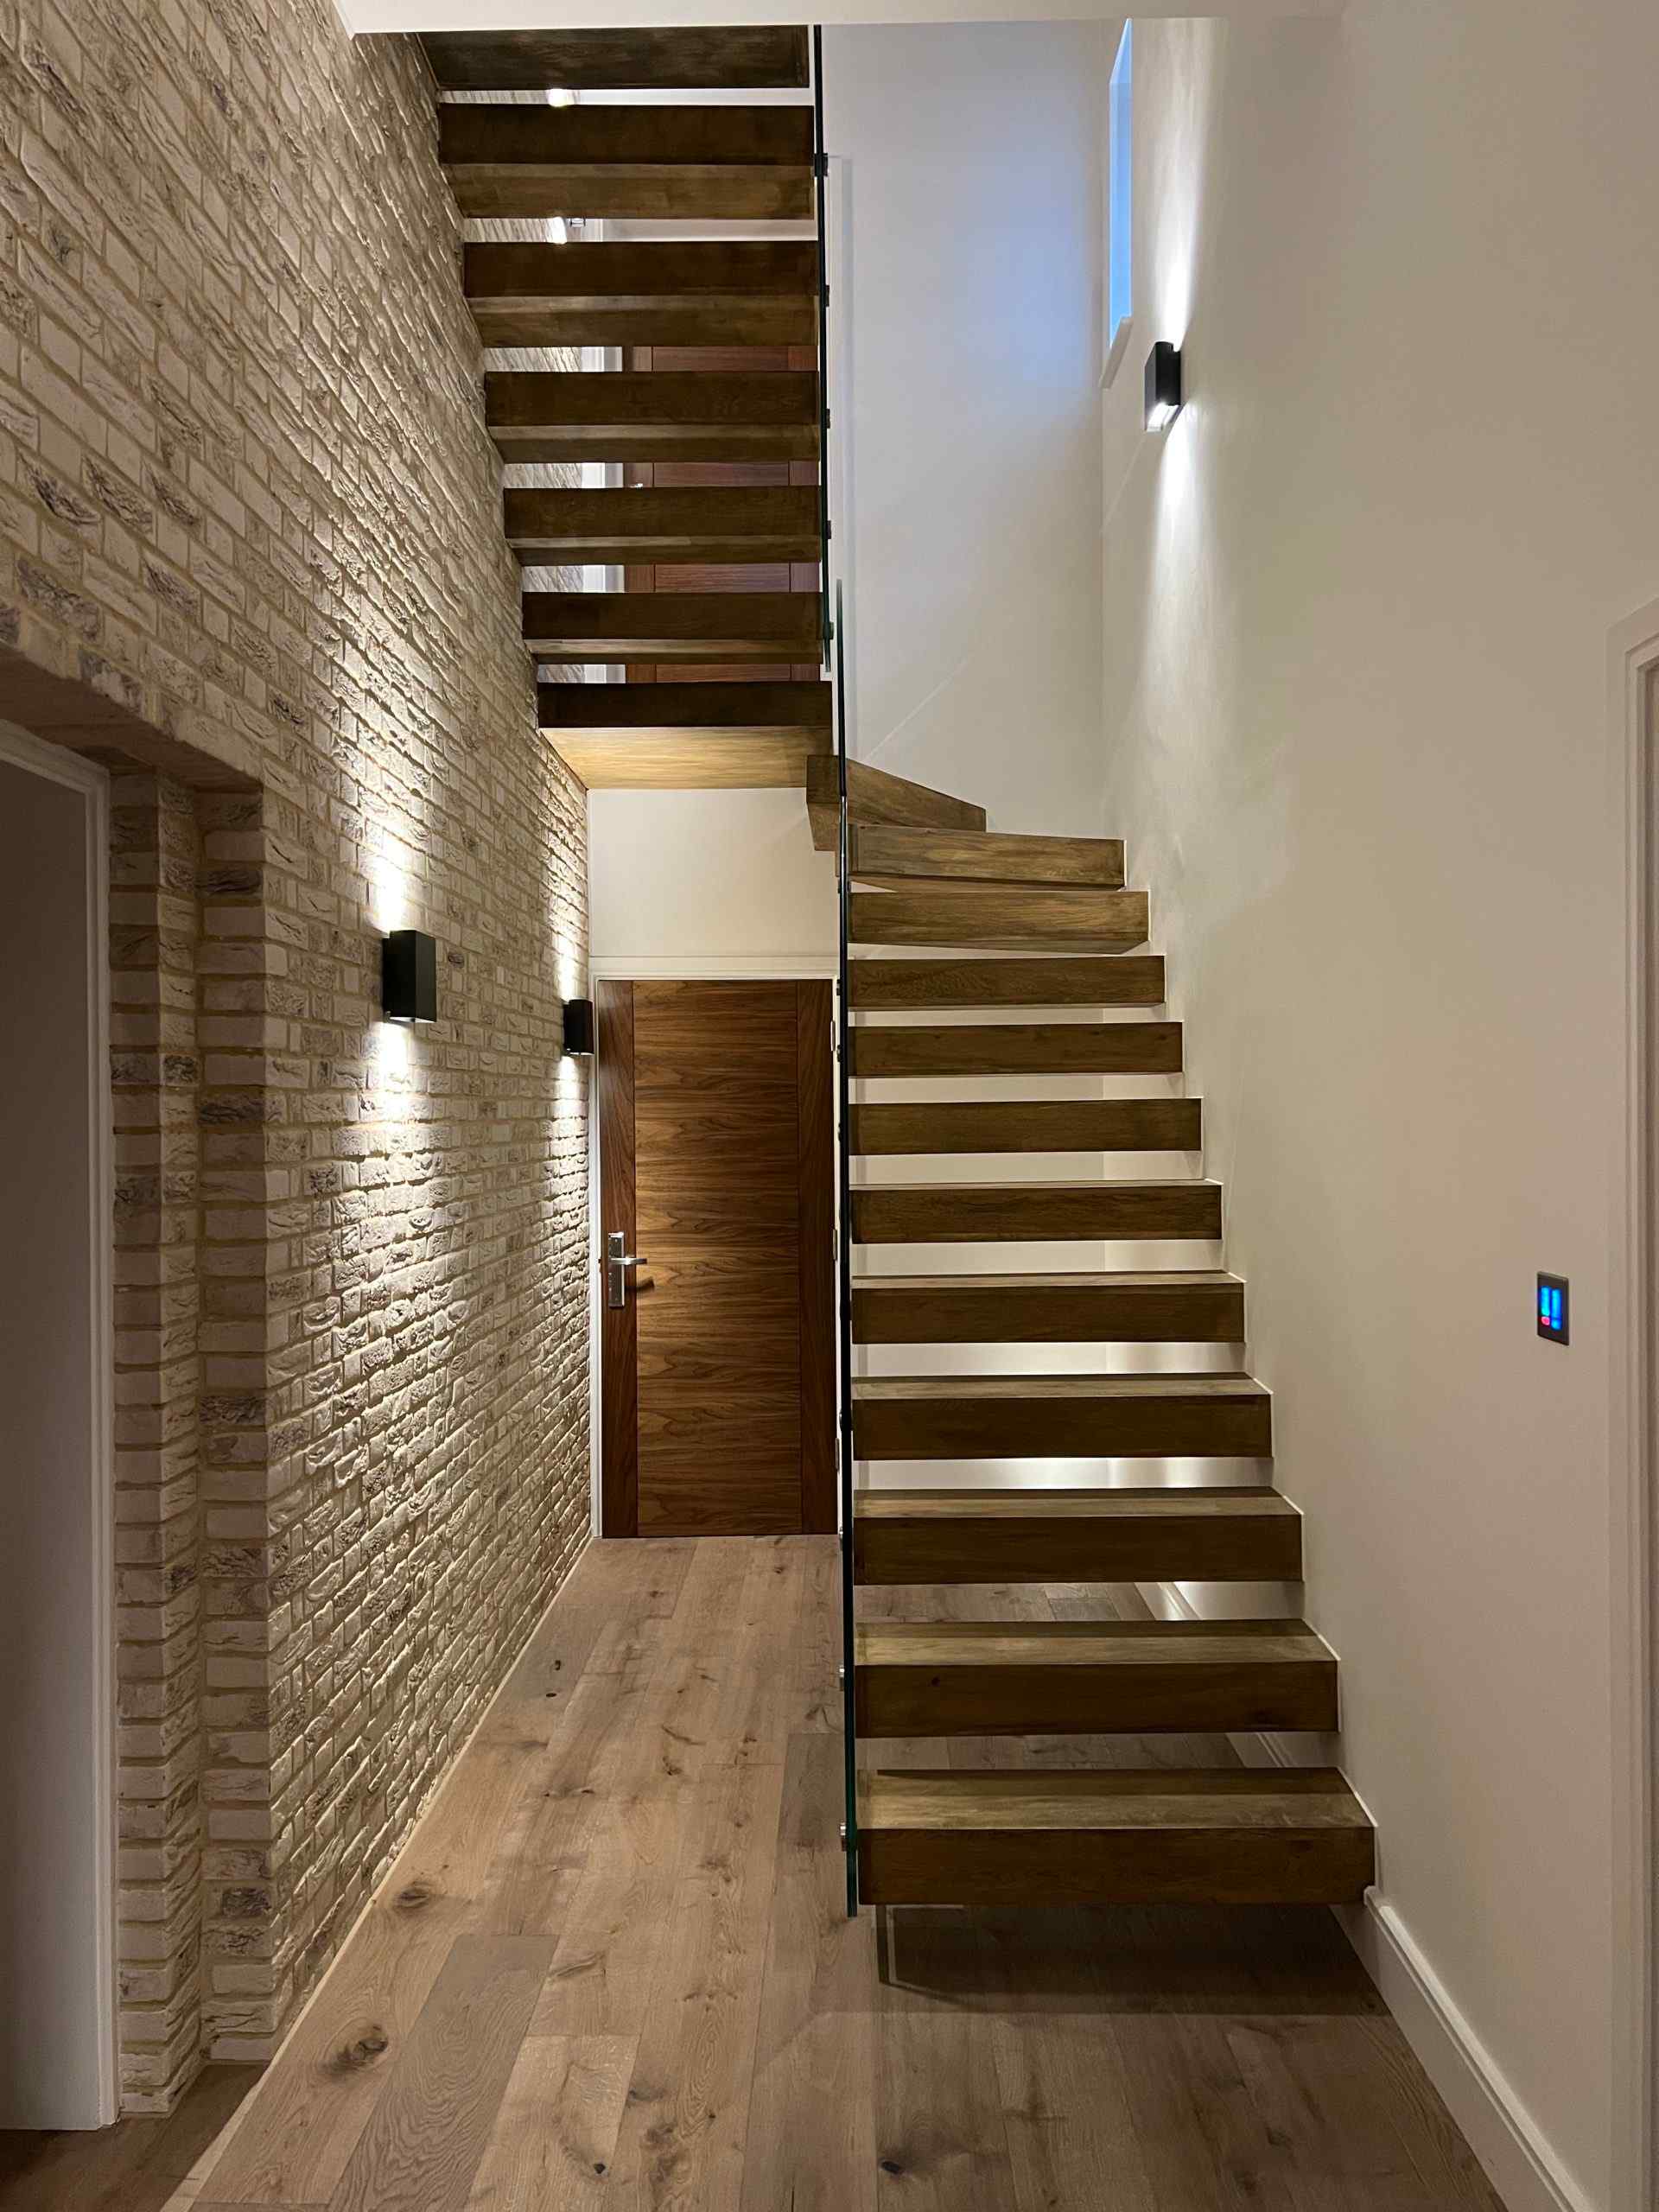 Floating staircase with oak steps